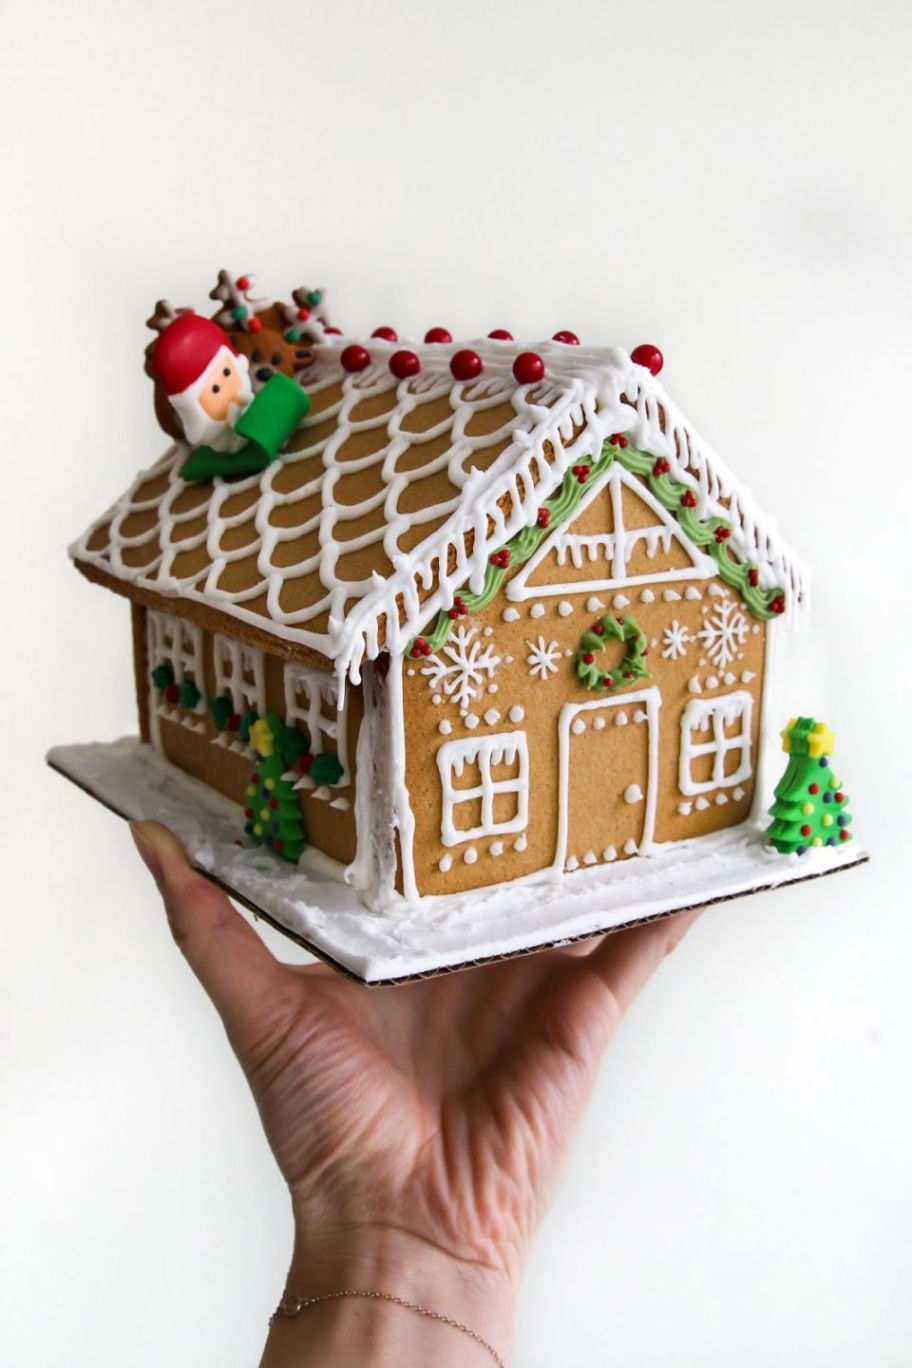 Get Festive With Fun Gingerbread House Decorating Ideas